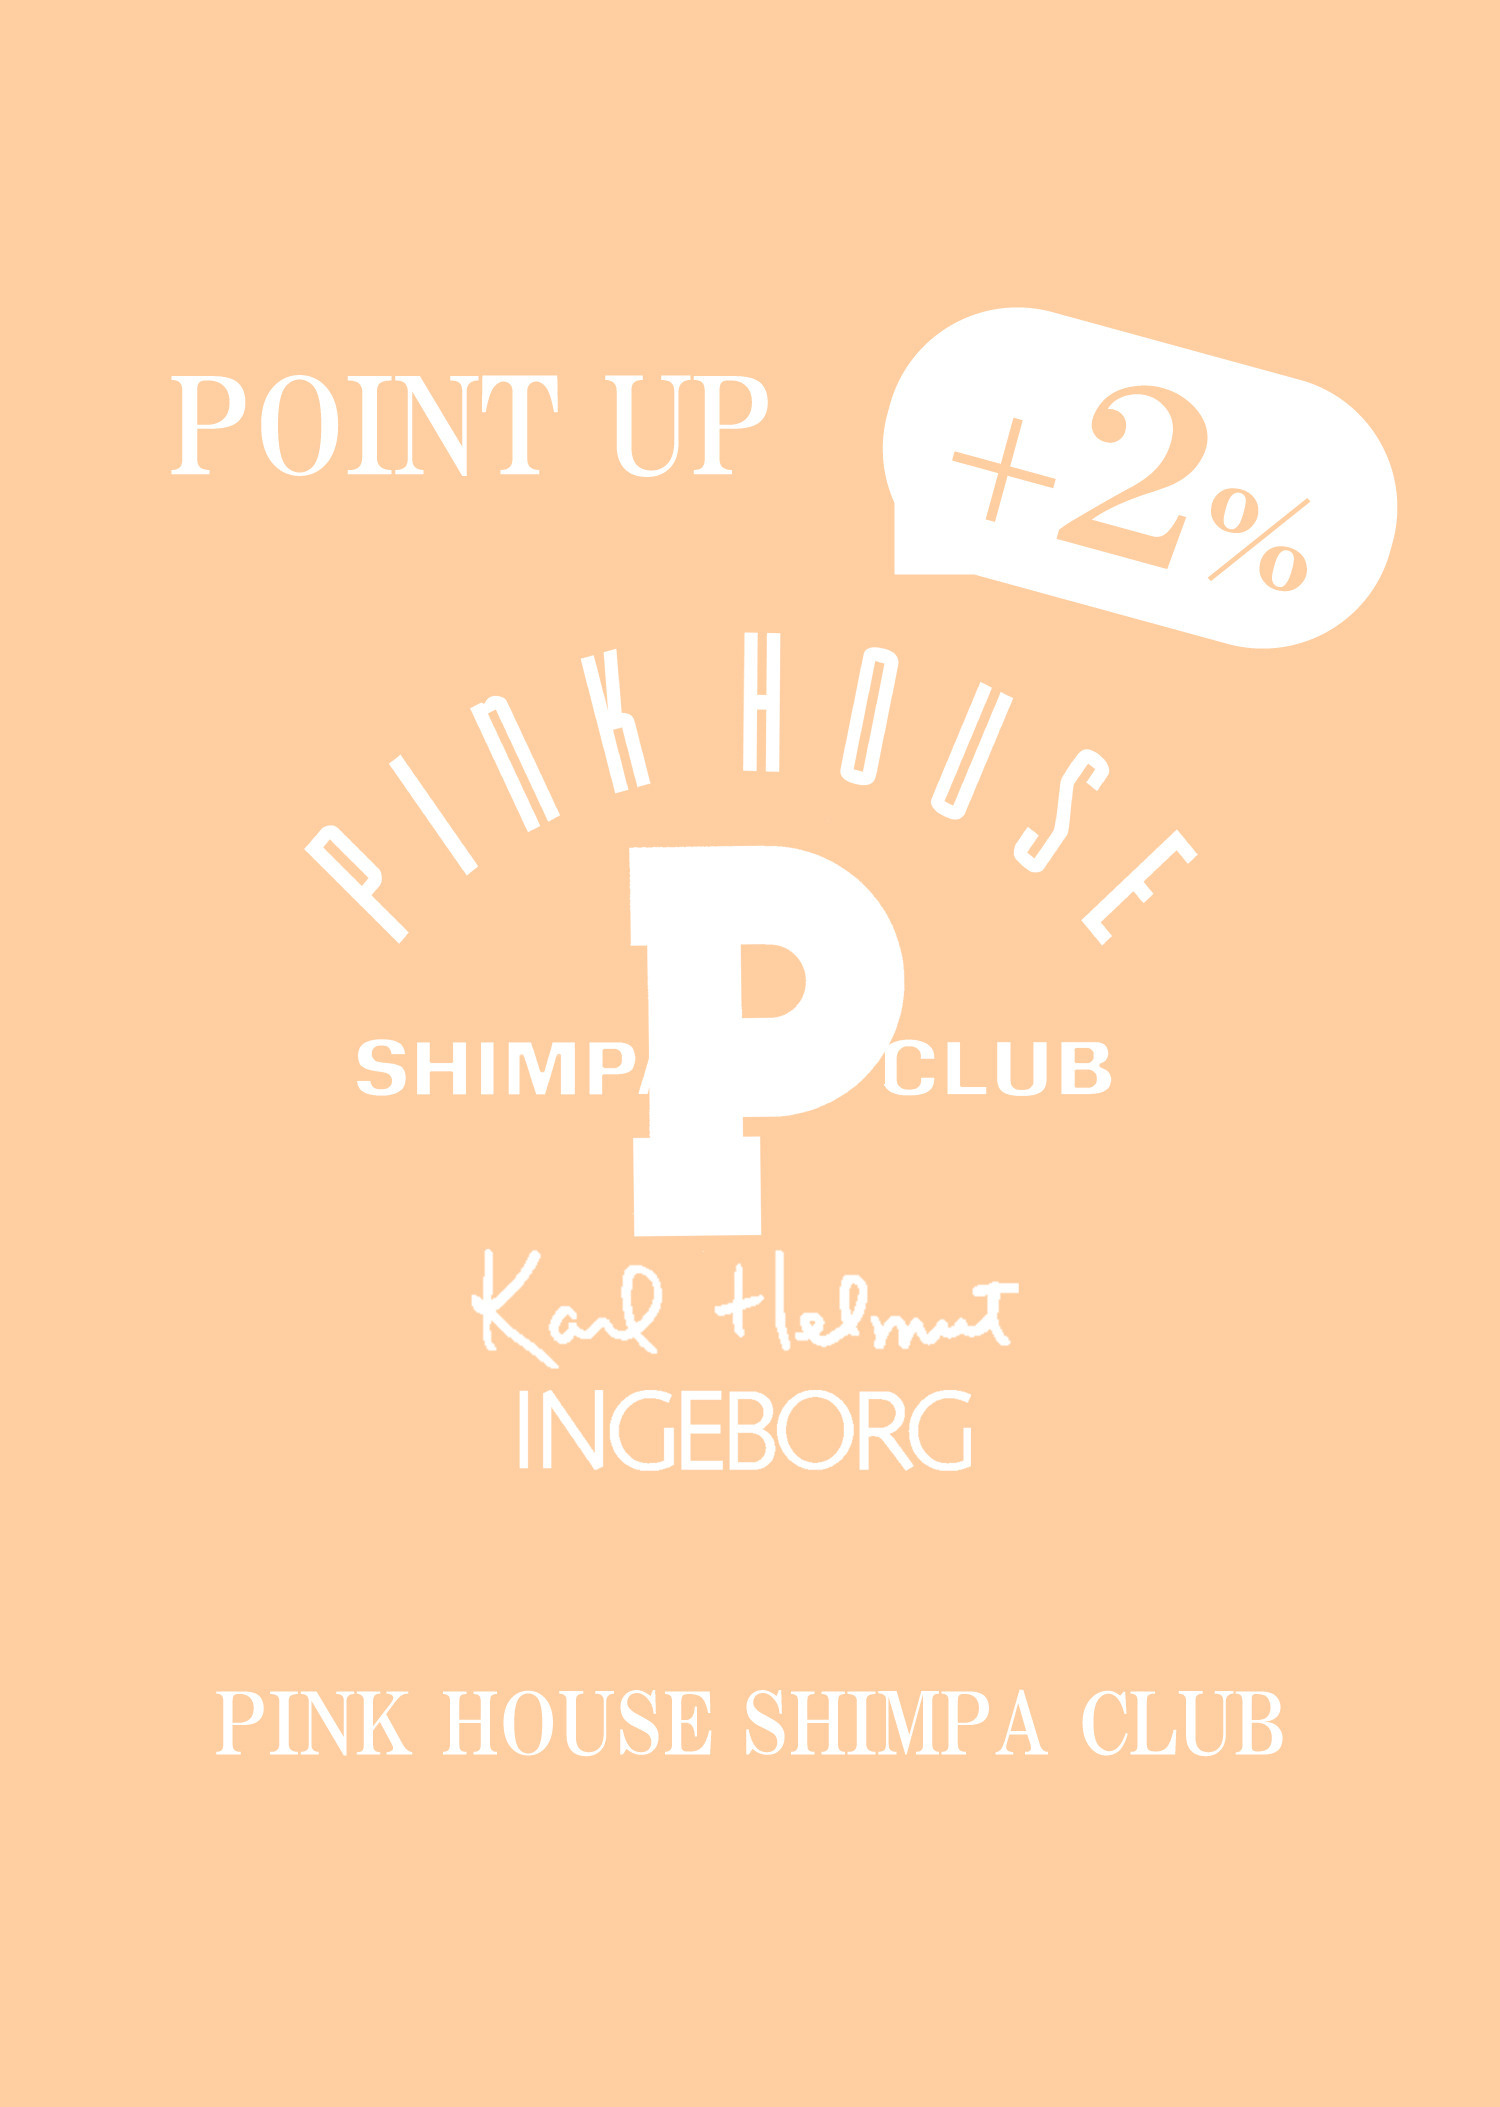 PINK HOUSE SHIMPA CLUB ＋2％ POINT UP campaign 4/3(wed)～7(sun)